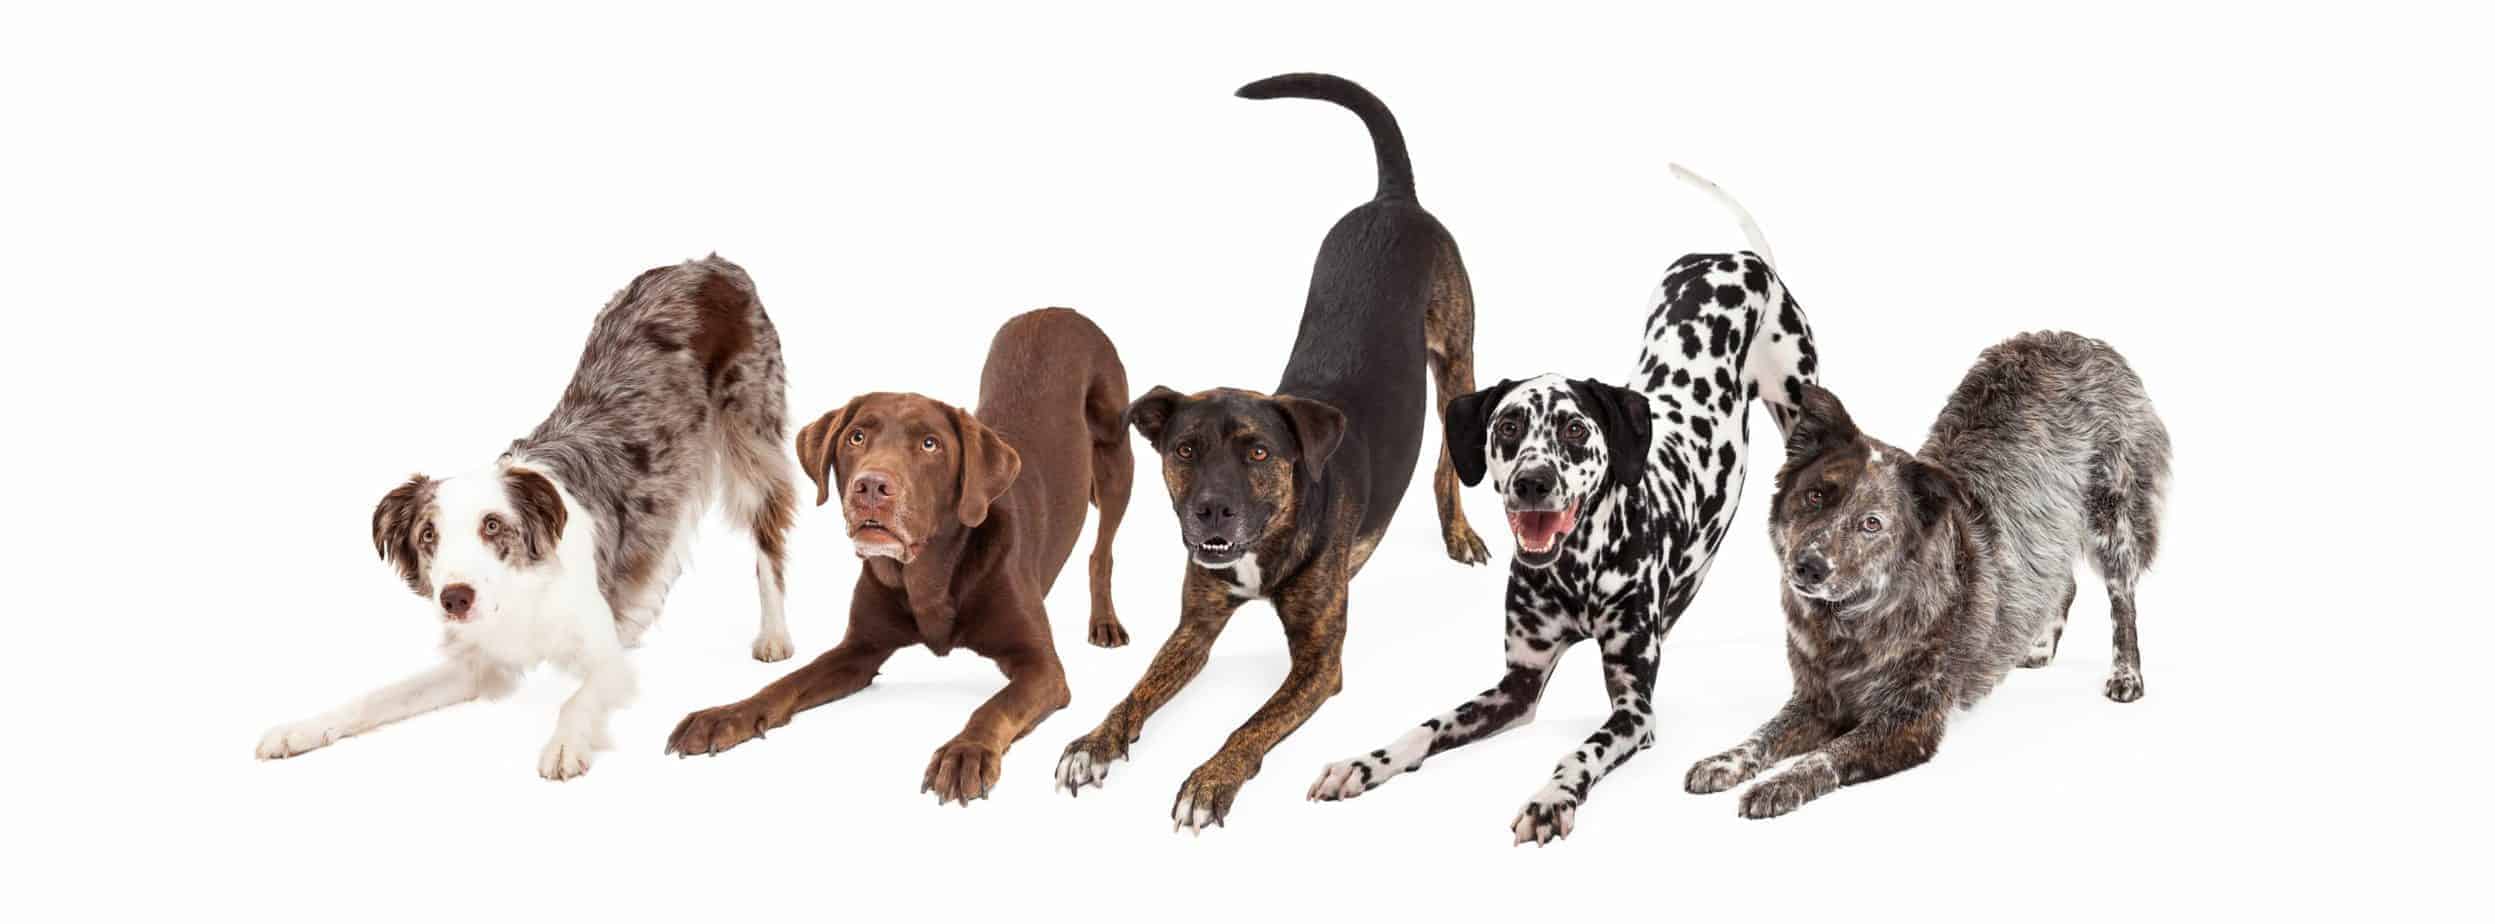 Bowing dogs show body language of happy, playful dogs. Pictured Australian Shepherd, Chocolate Labrador Retriever, and Dalmatian.